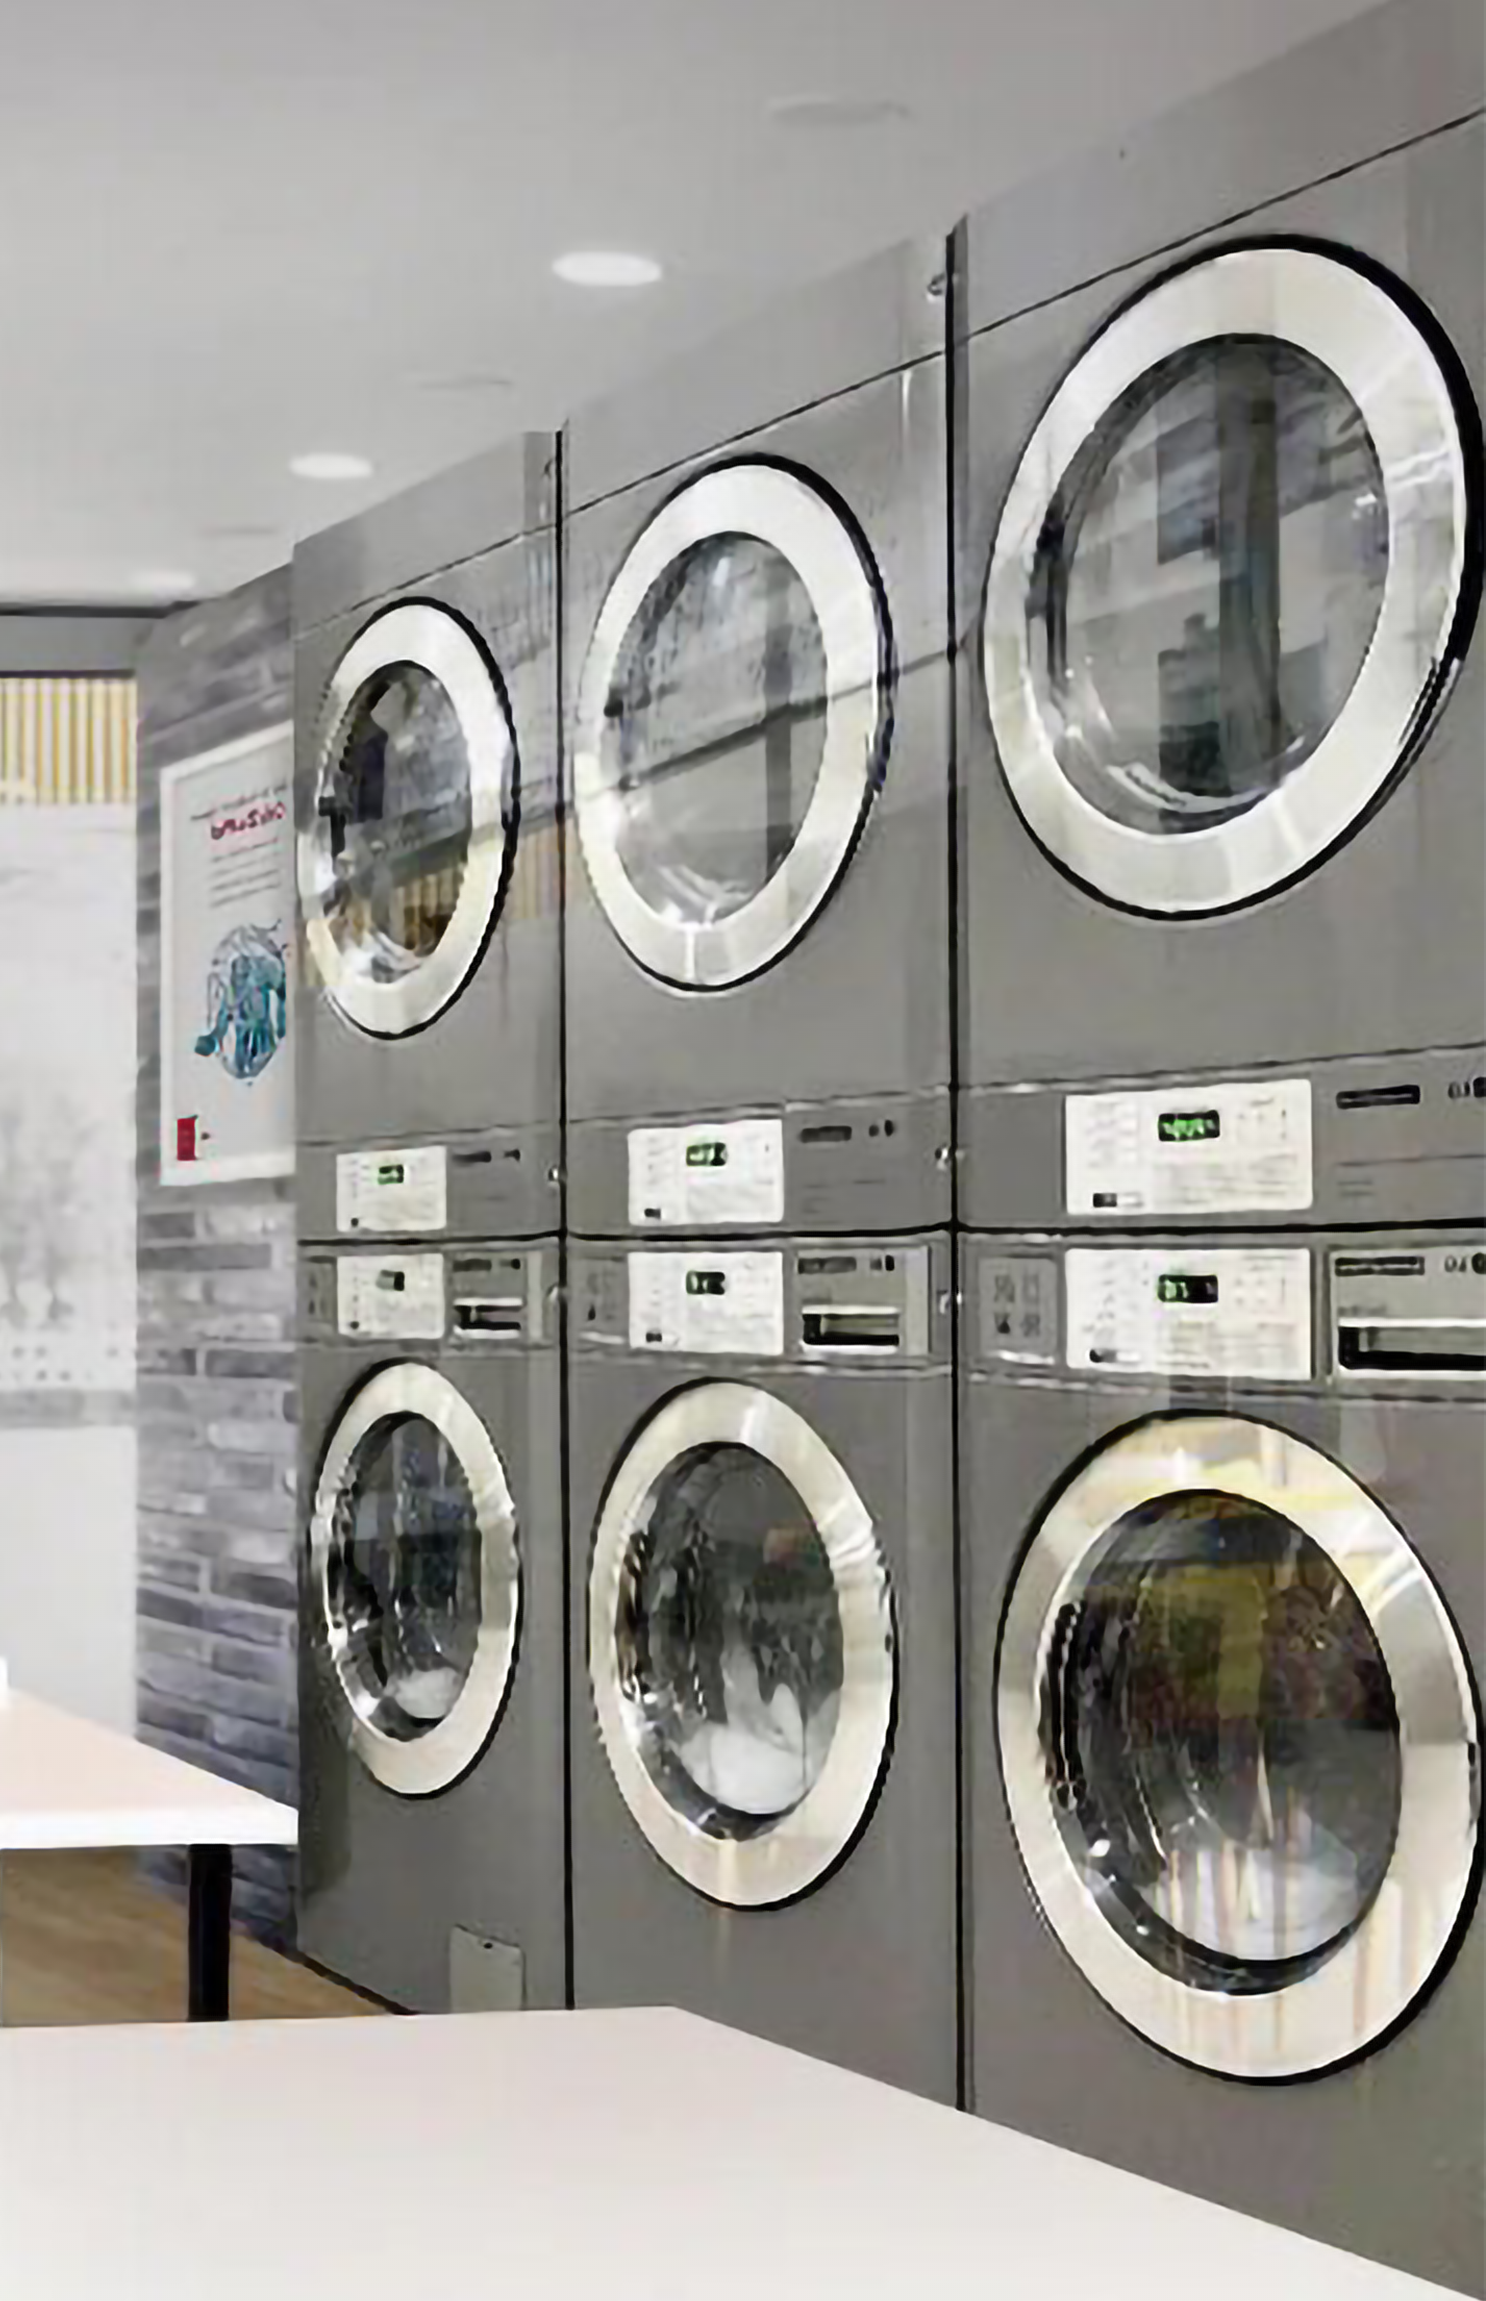 Commercial Stackable Washer Dryer Sets for Commercial Laundromat